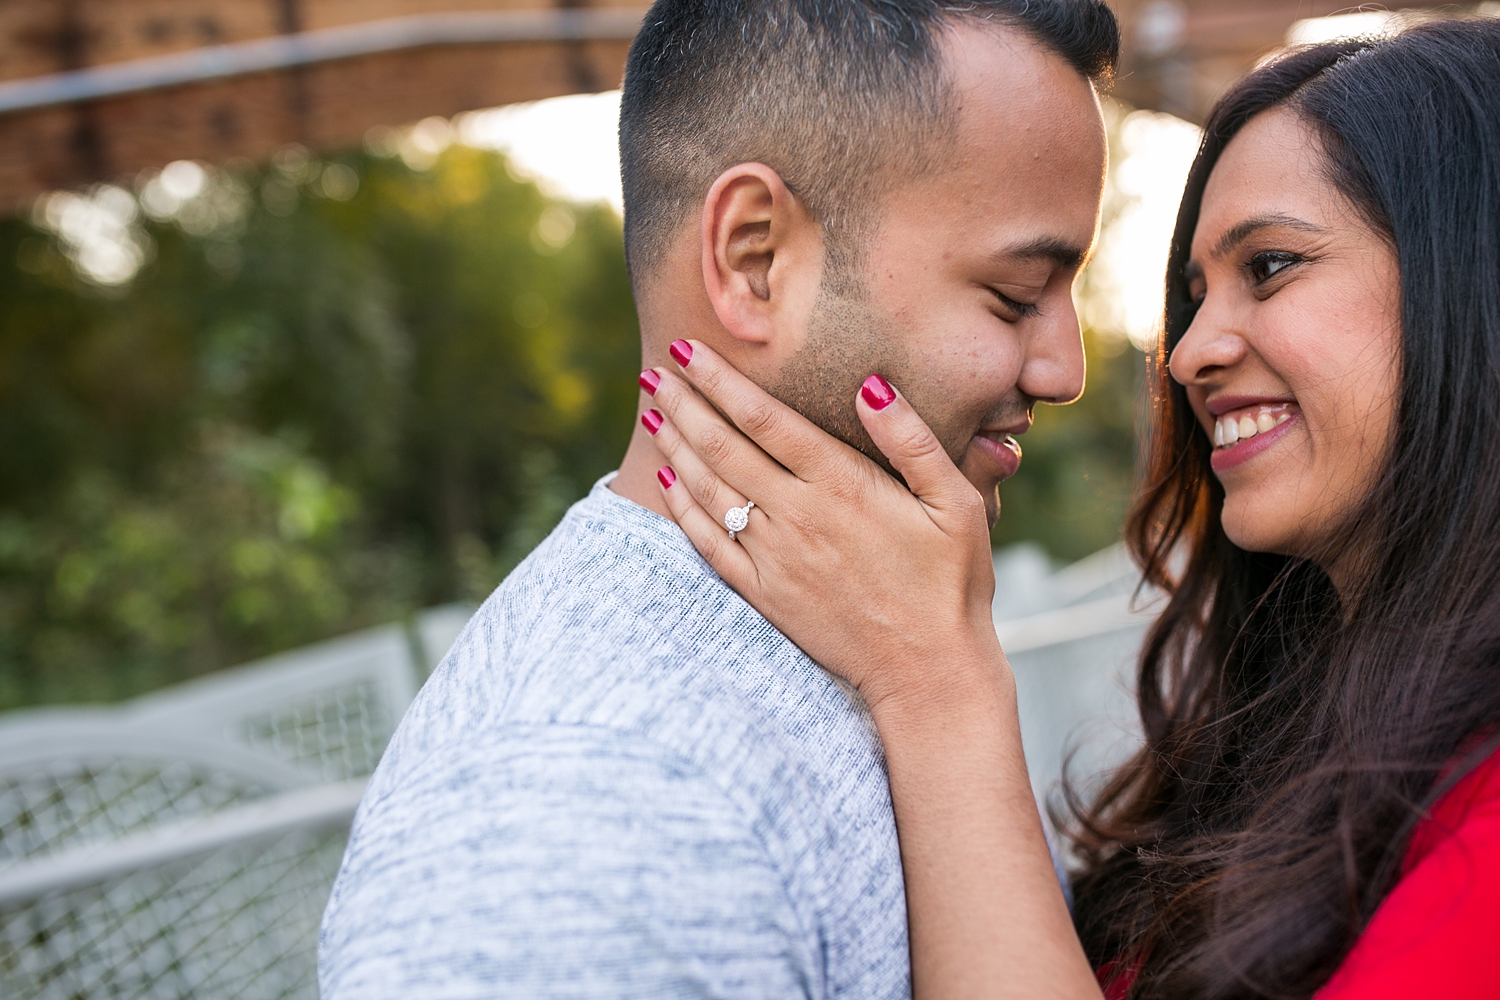 Style tips for amazing engagement pictures: do your nails and get your ring cleaned.